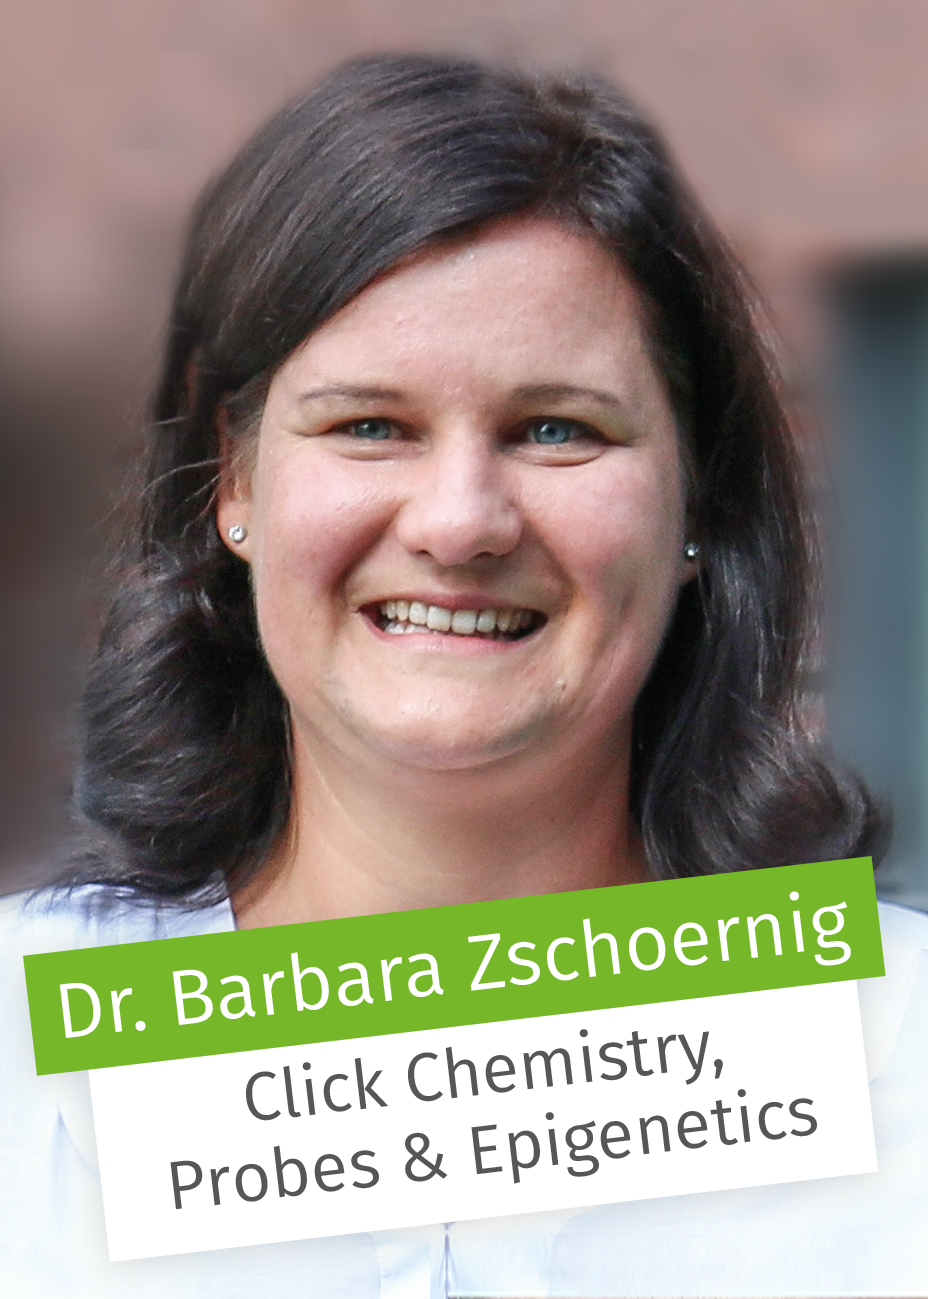 Dr. Barbara Zschoerning